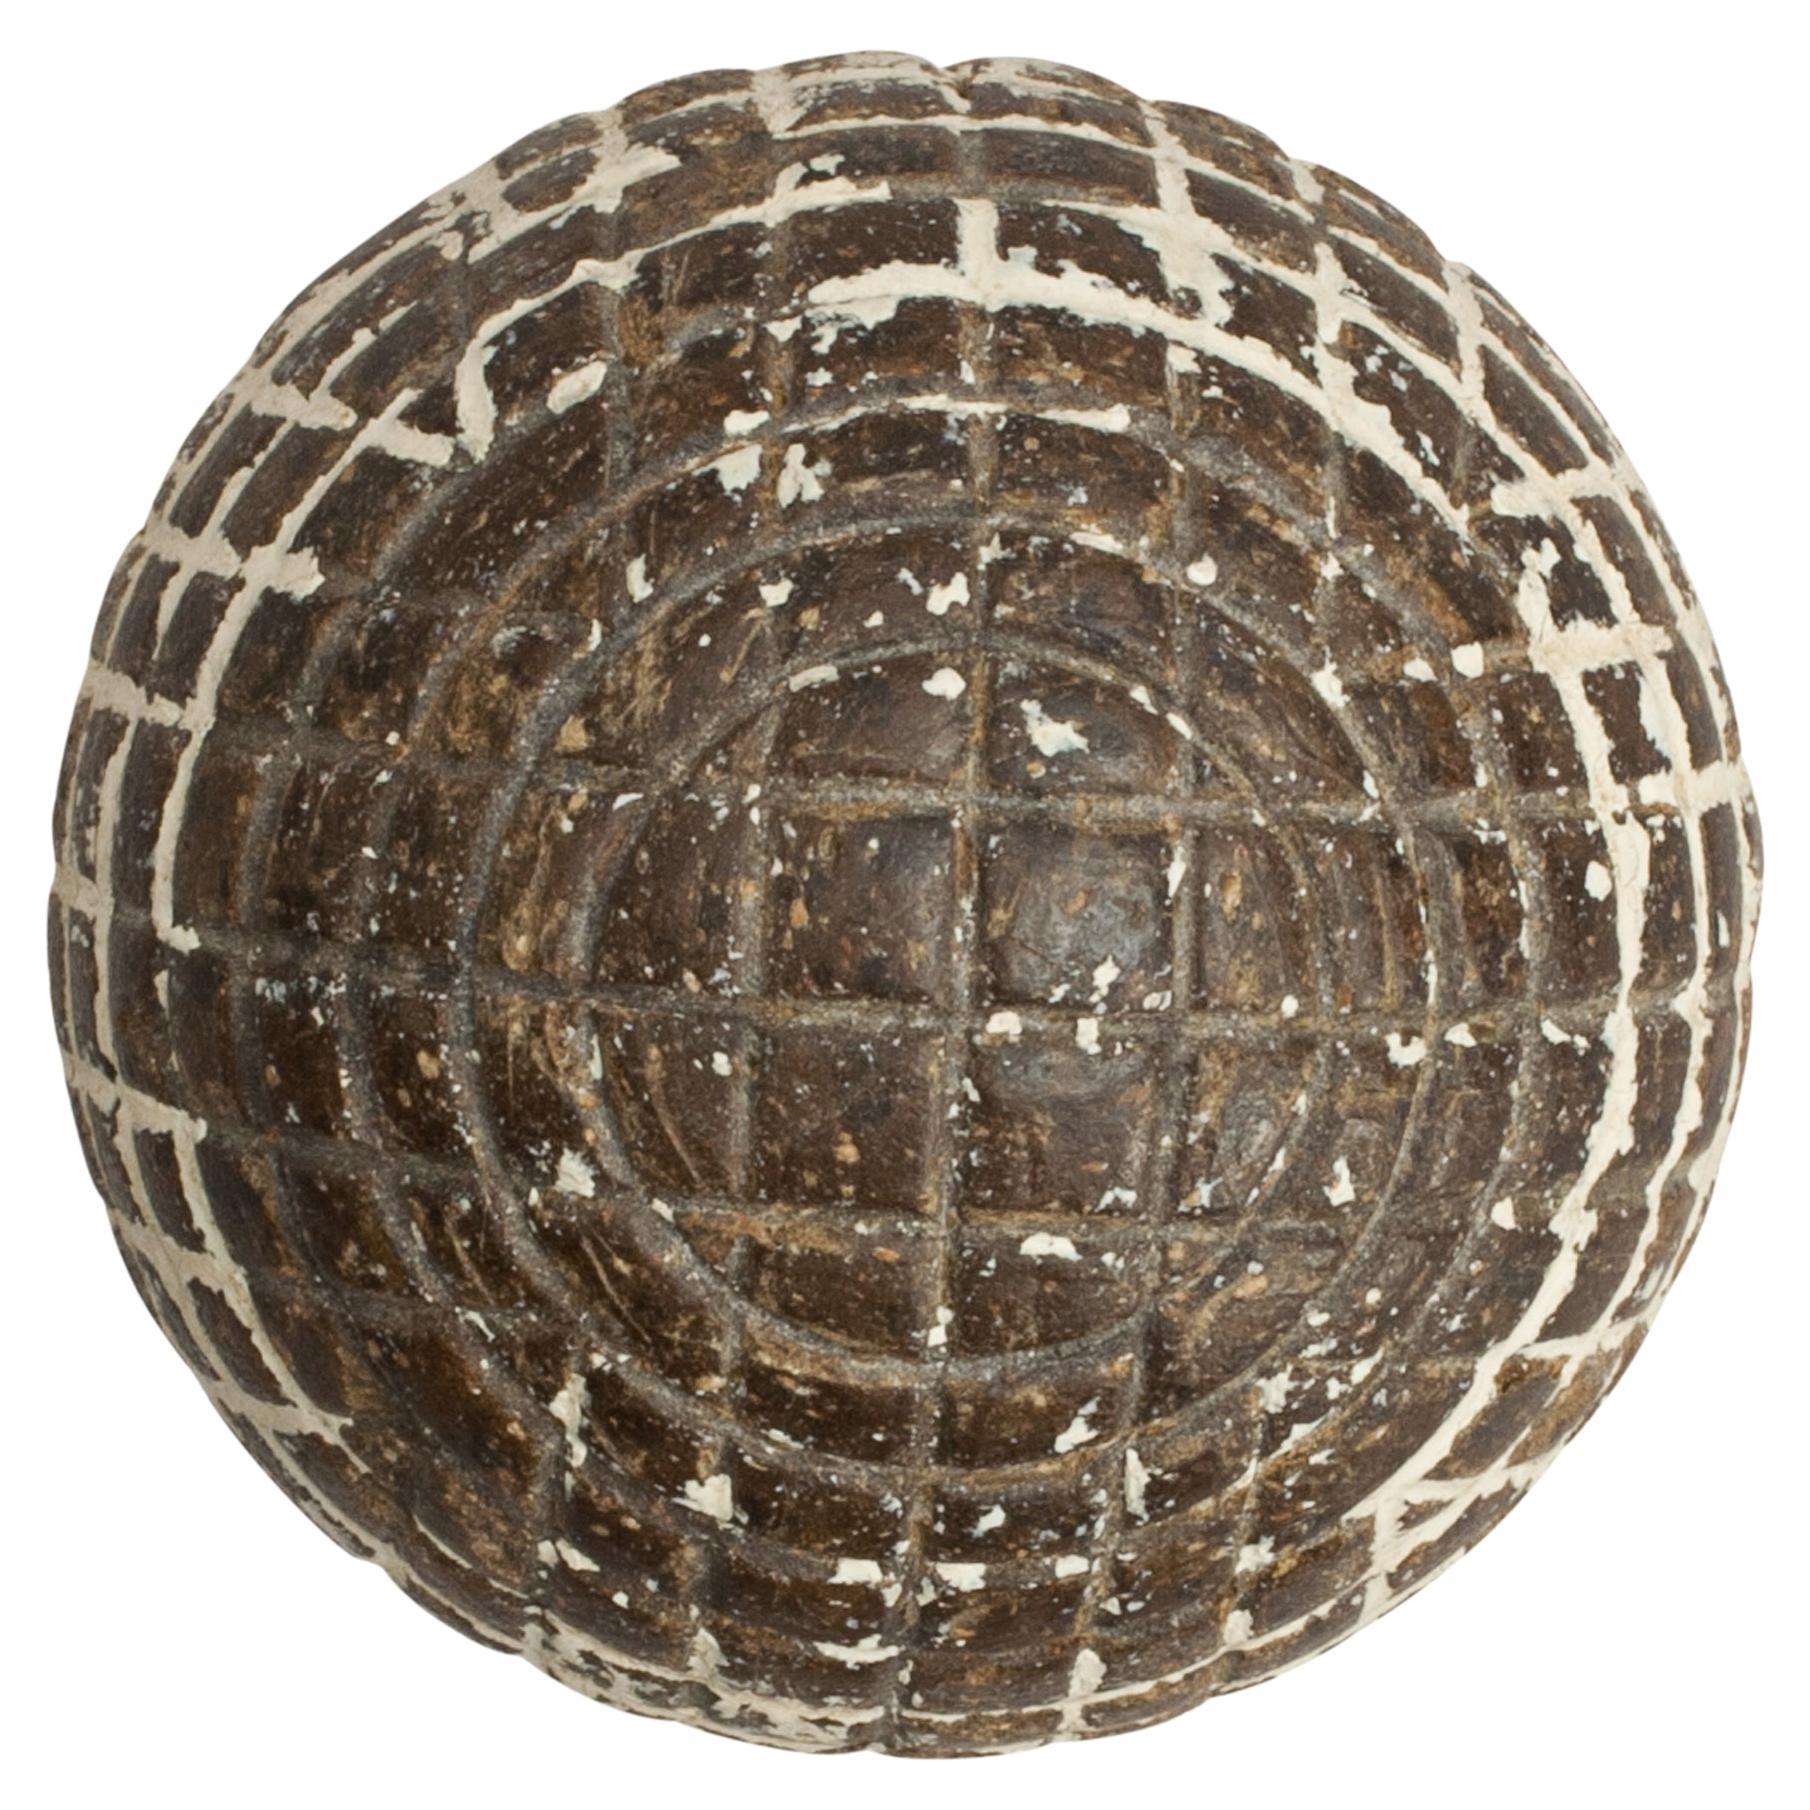 Antique Gutta Percha Golf Ball With Mesh Pattern. For Sale at 1stDibs